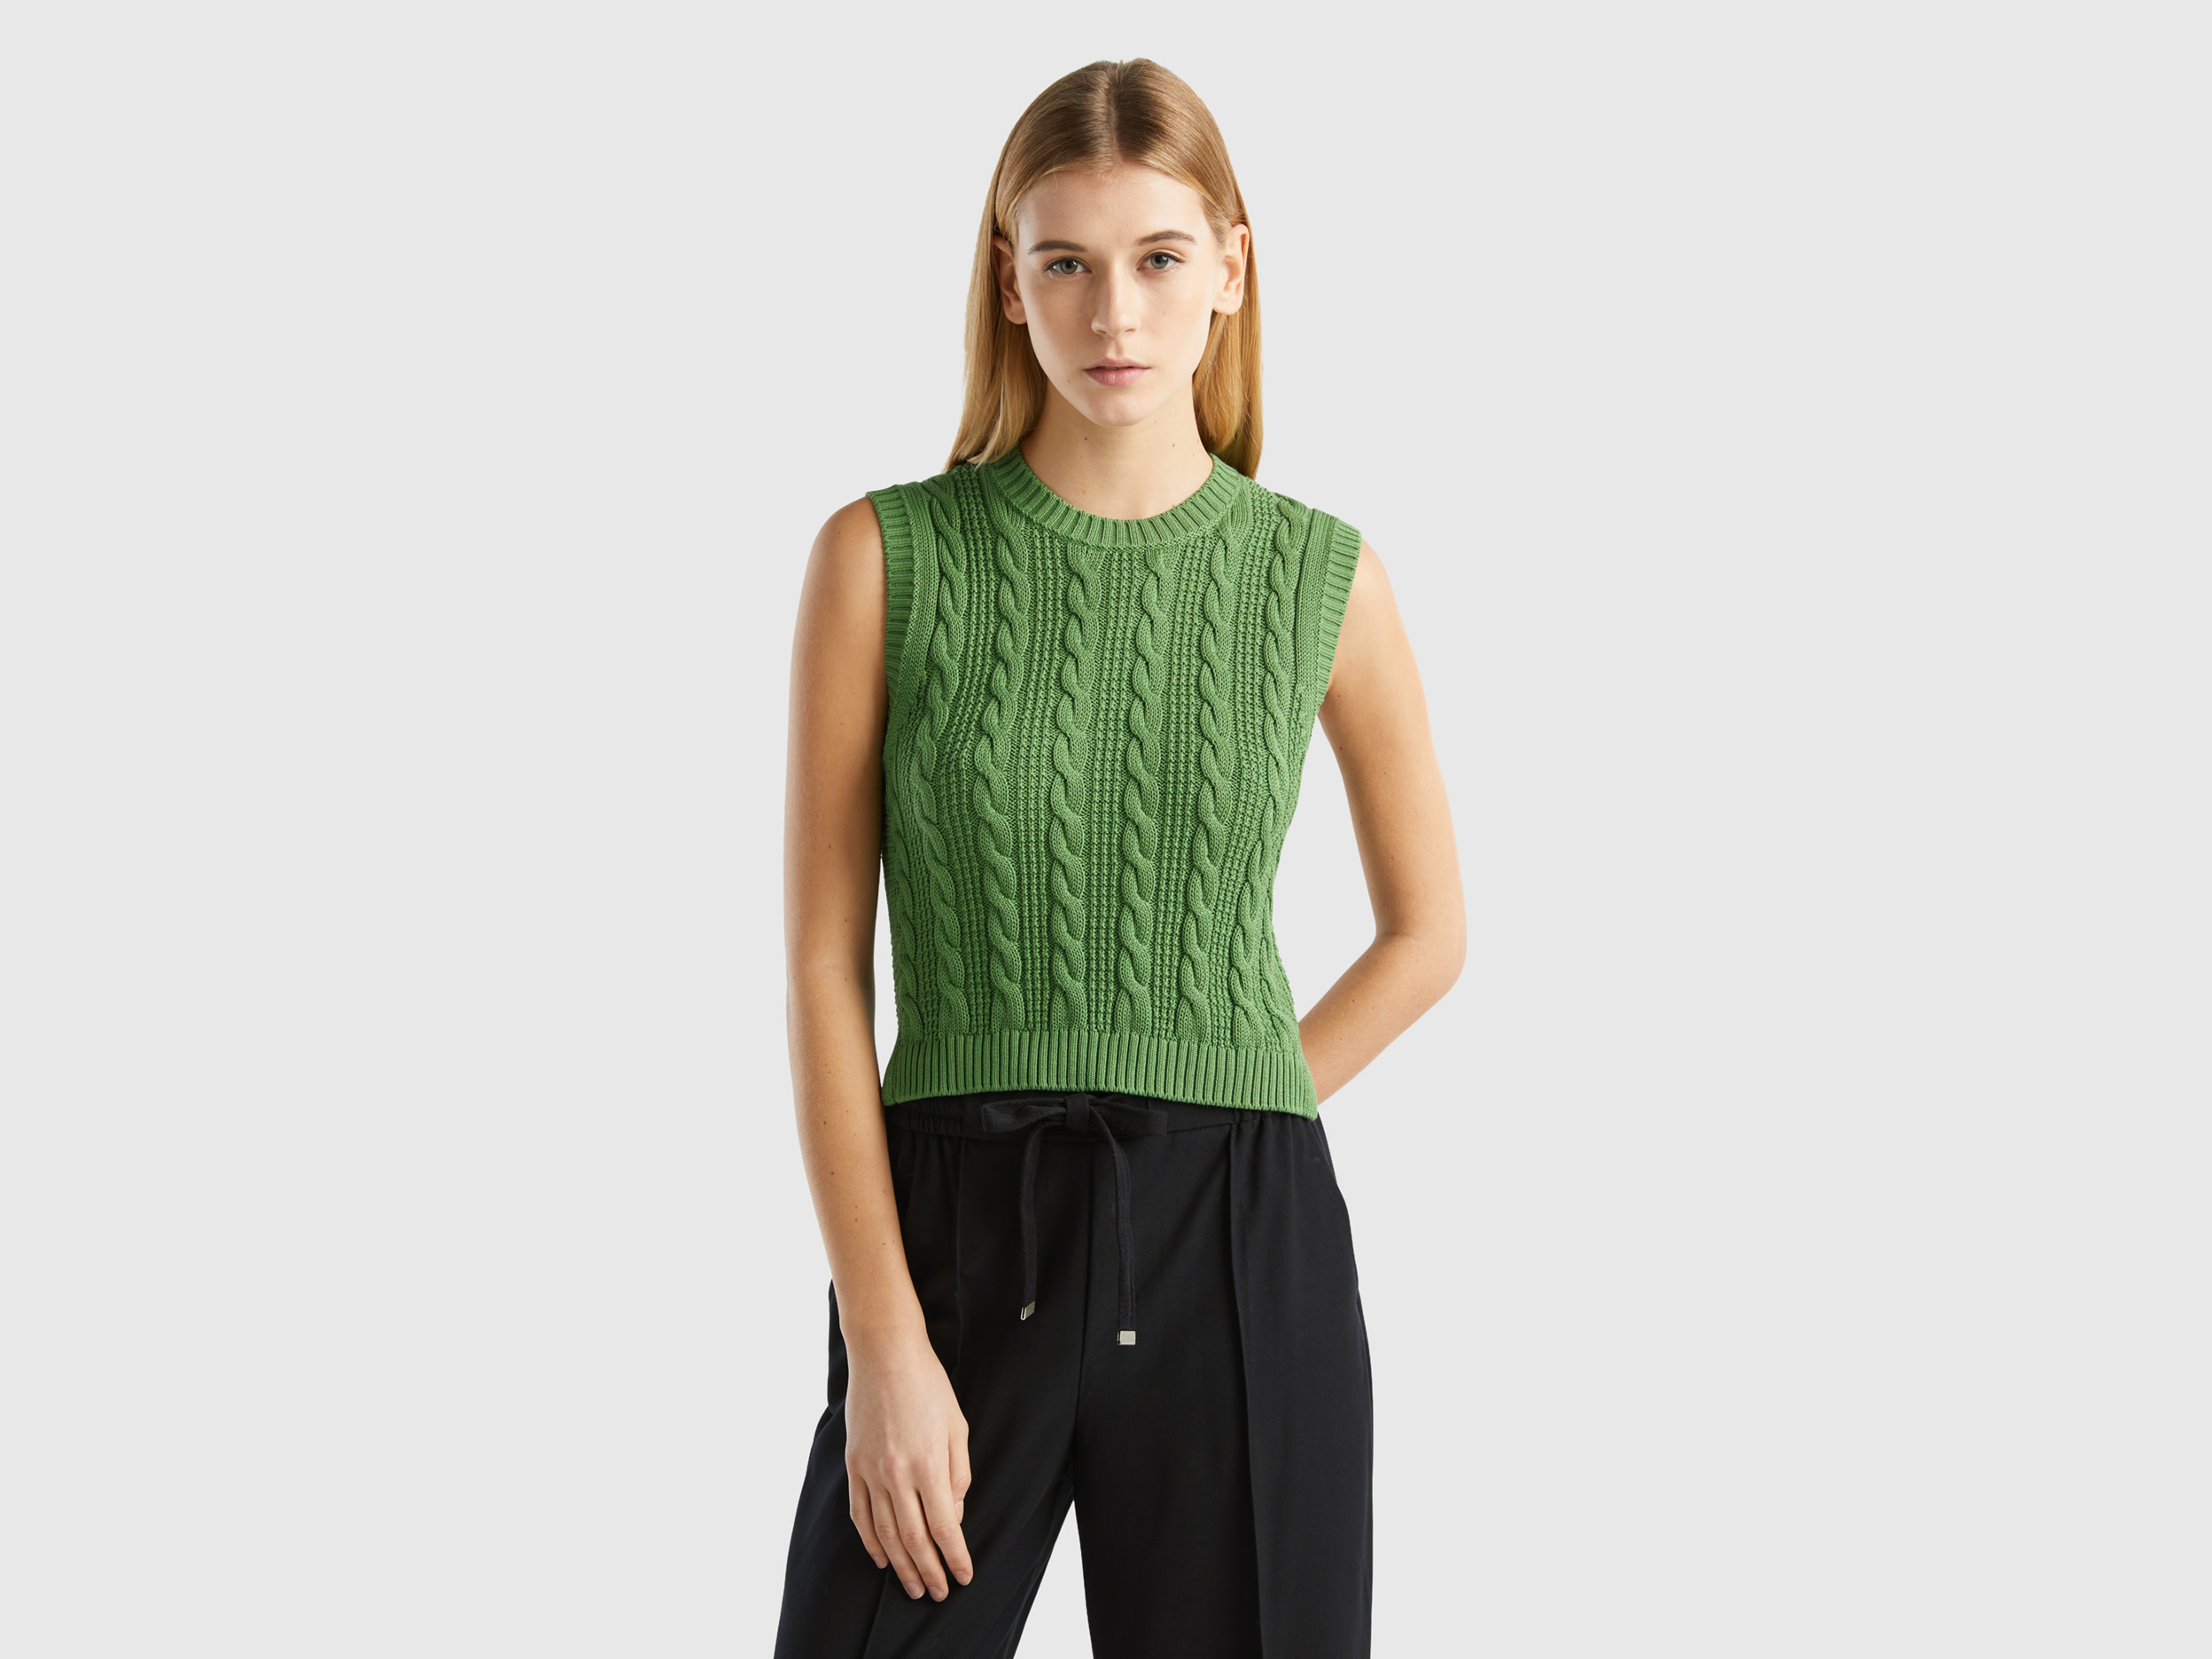 Benetton, Cropped Cable Knit Vest, size L, Military Green, Women